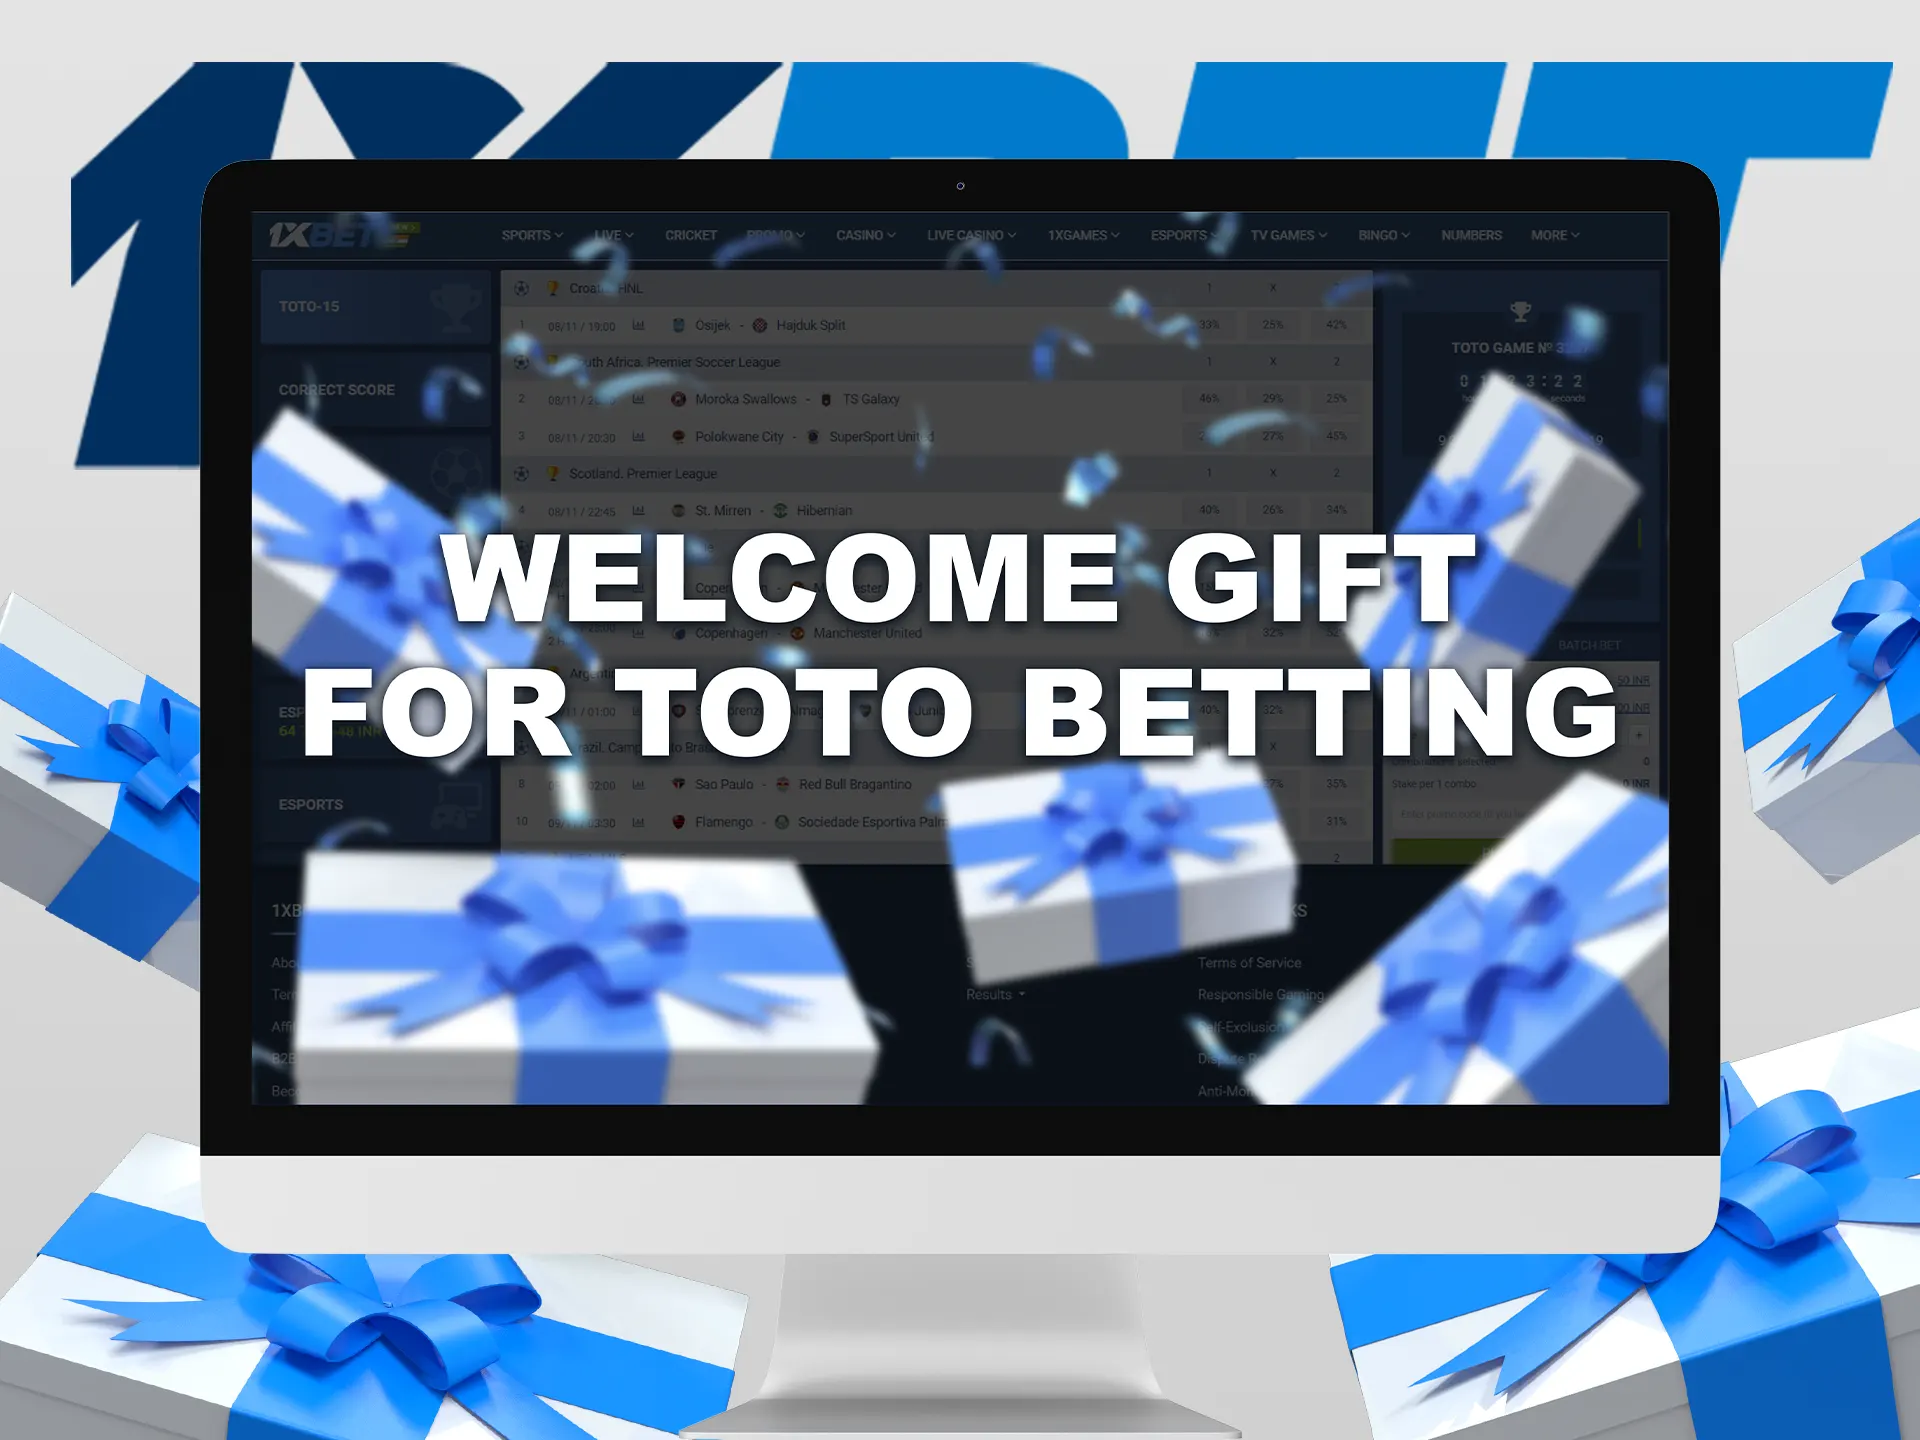 Be sure to get your profitable bonus after registering and making your first deposit at 1xBet.